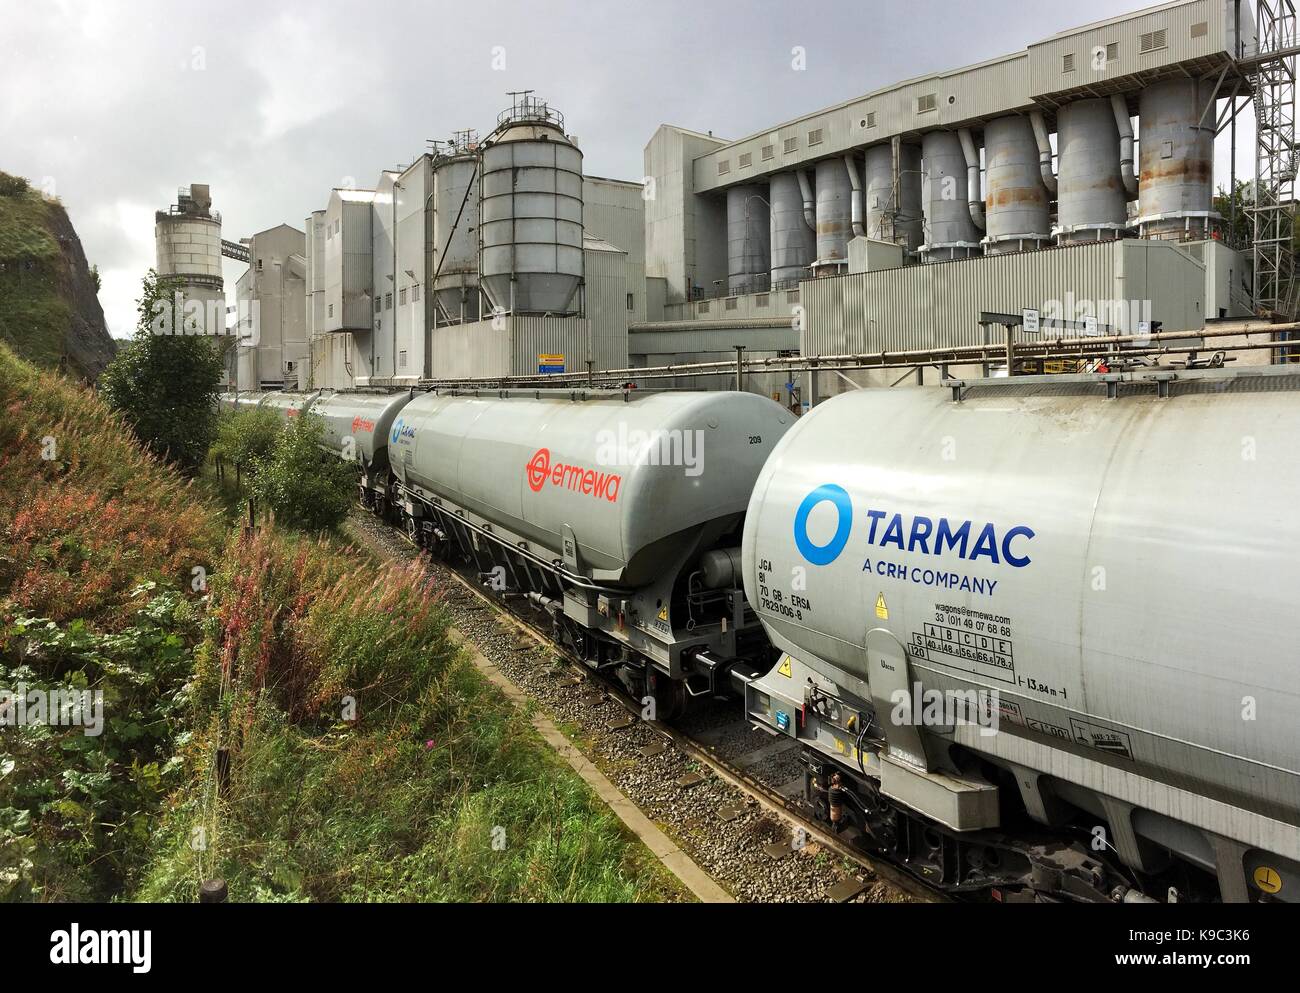 A cement tanker train loading at Tarmac's Tunsted Quarry in the Peak District, UK which is part of The CRH Group of companies. Stock Photo